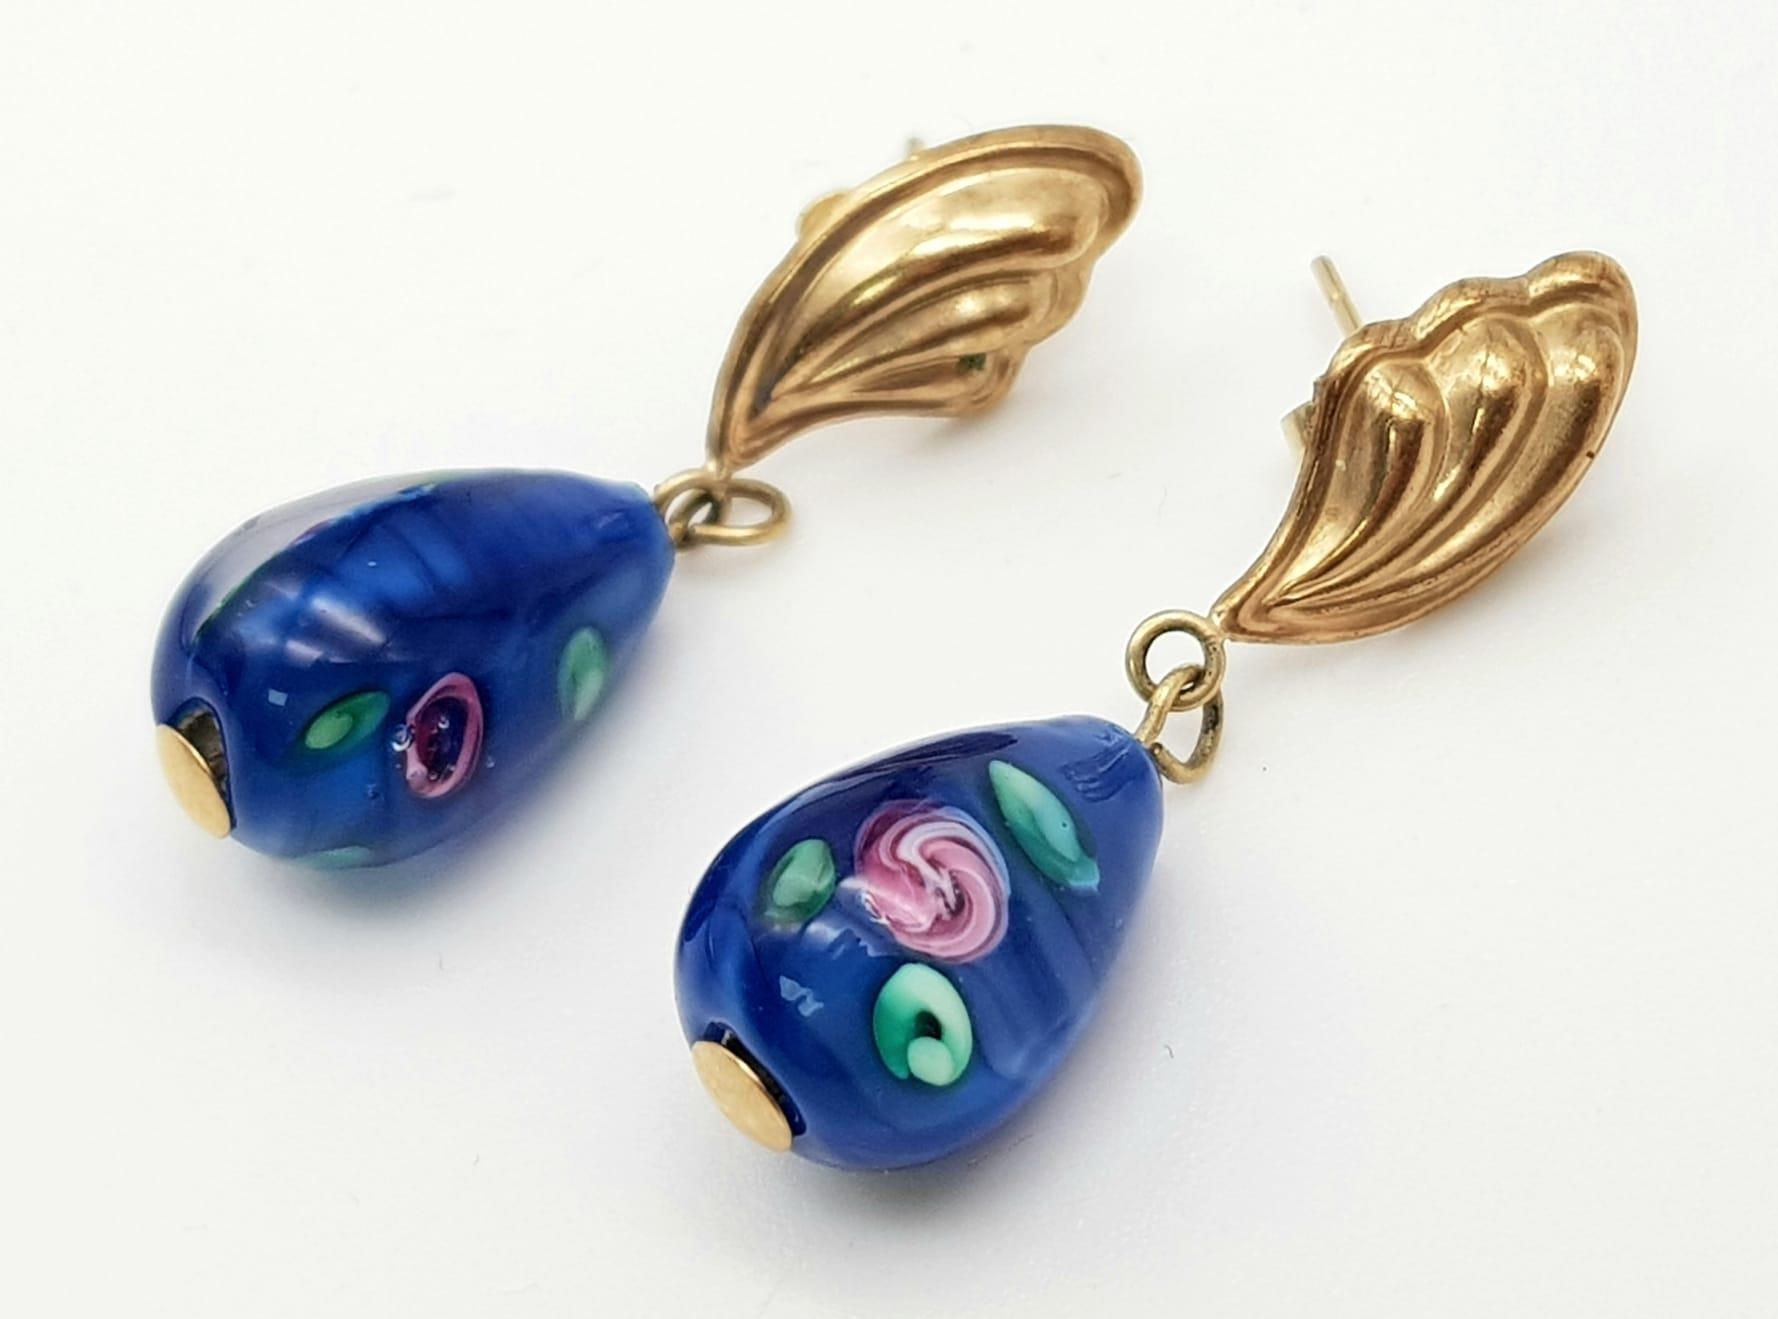 A Vintage Fancy Pair of 9K Yellow Gold and Blue Decorated Enamel Teardrop Earrings. 4.13g total